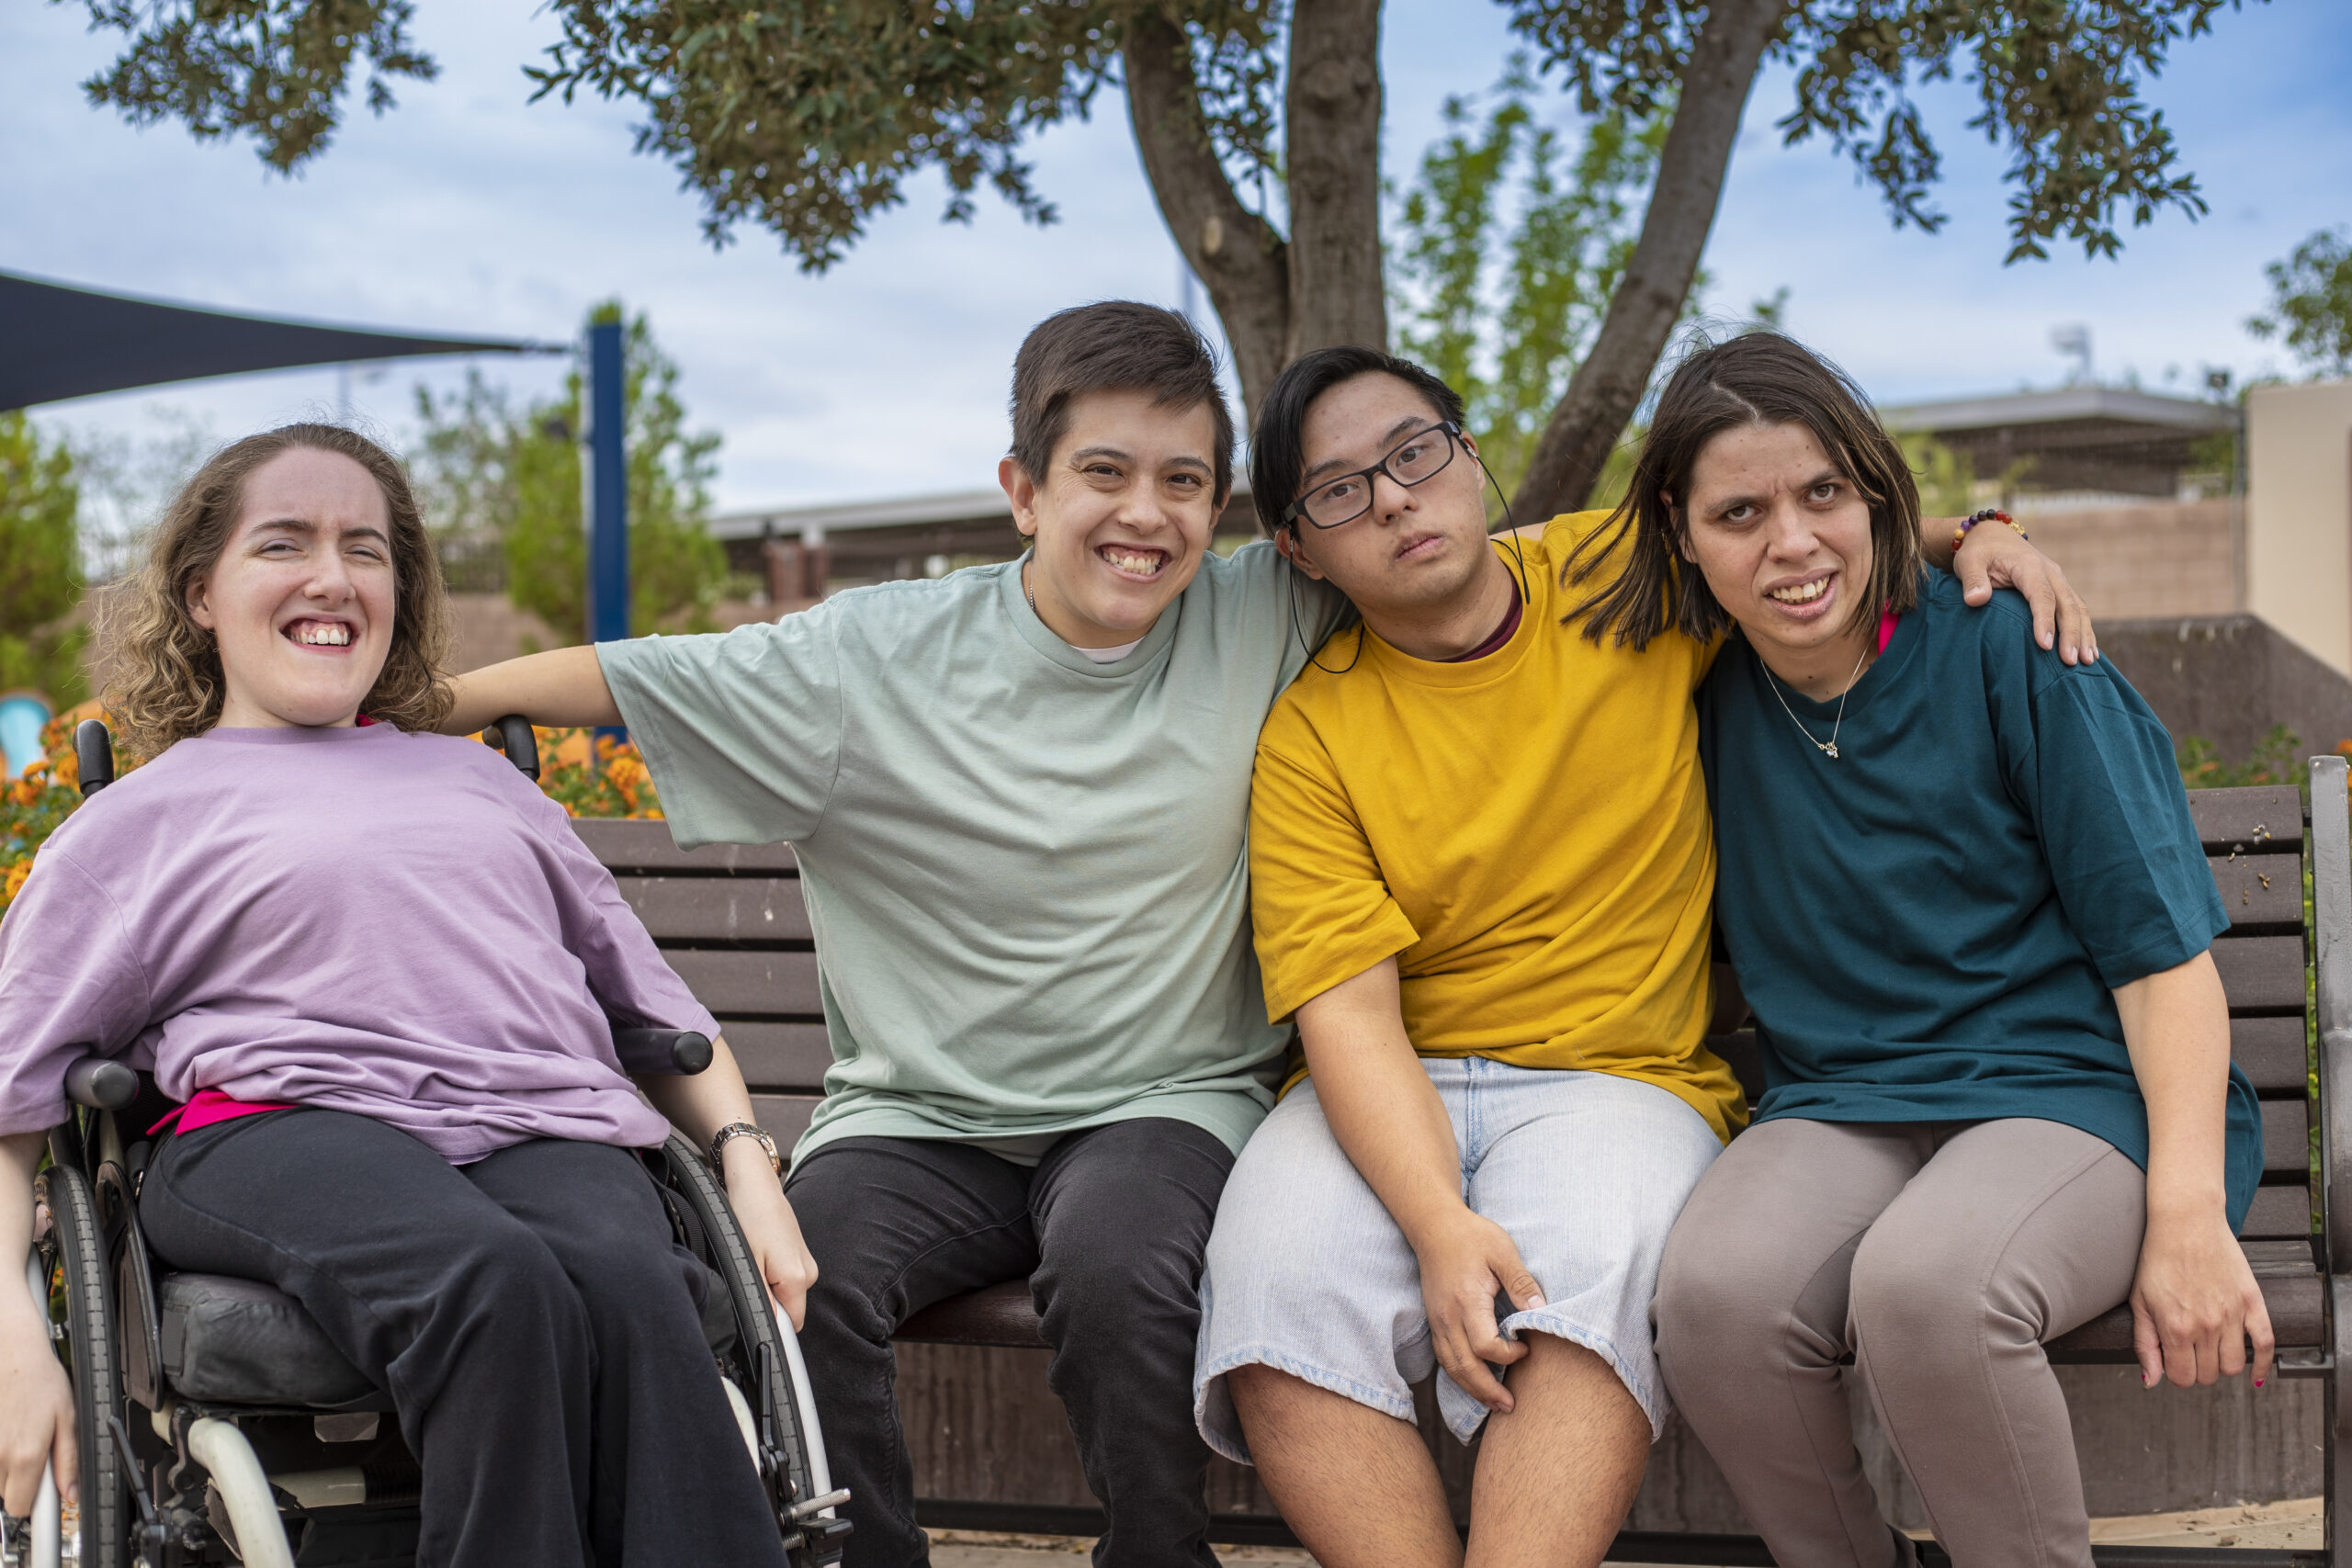 image of young adult with disabilities sitting together on bench